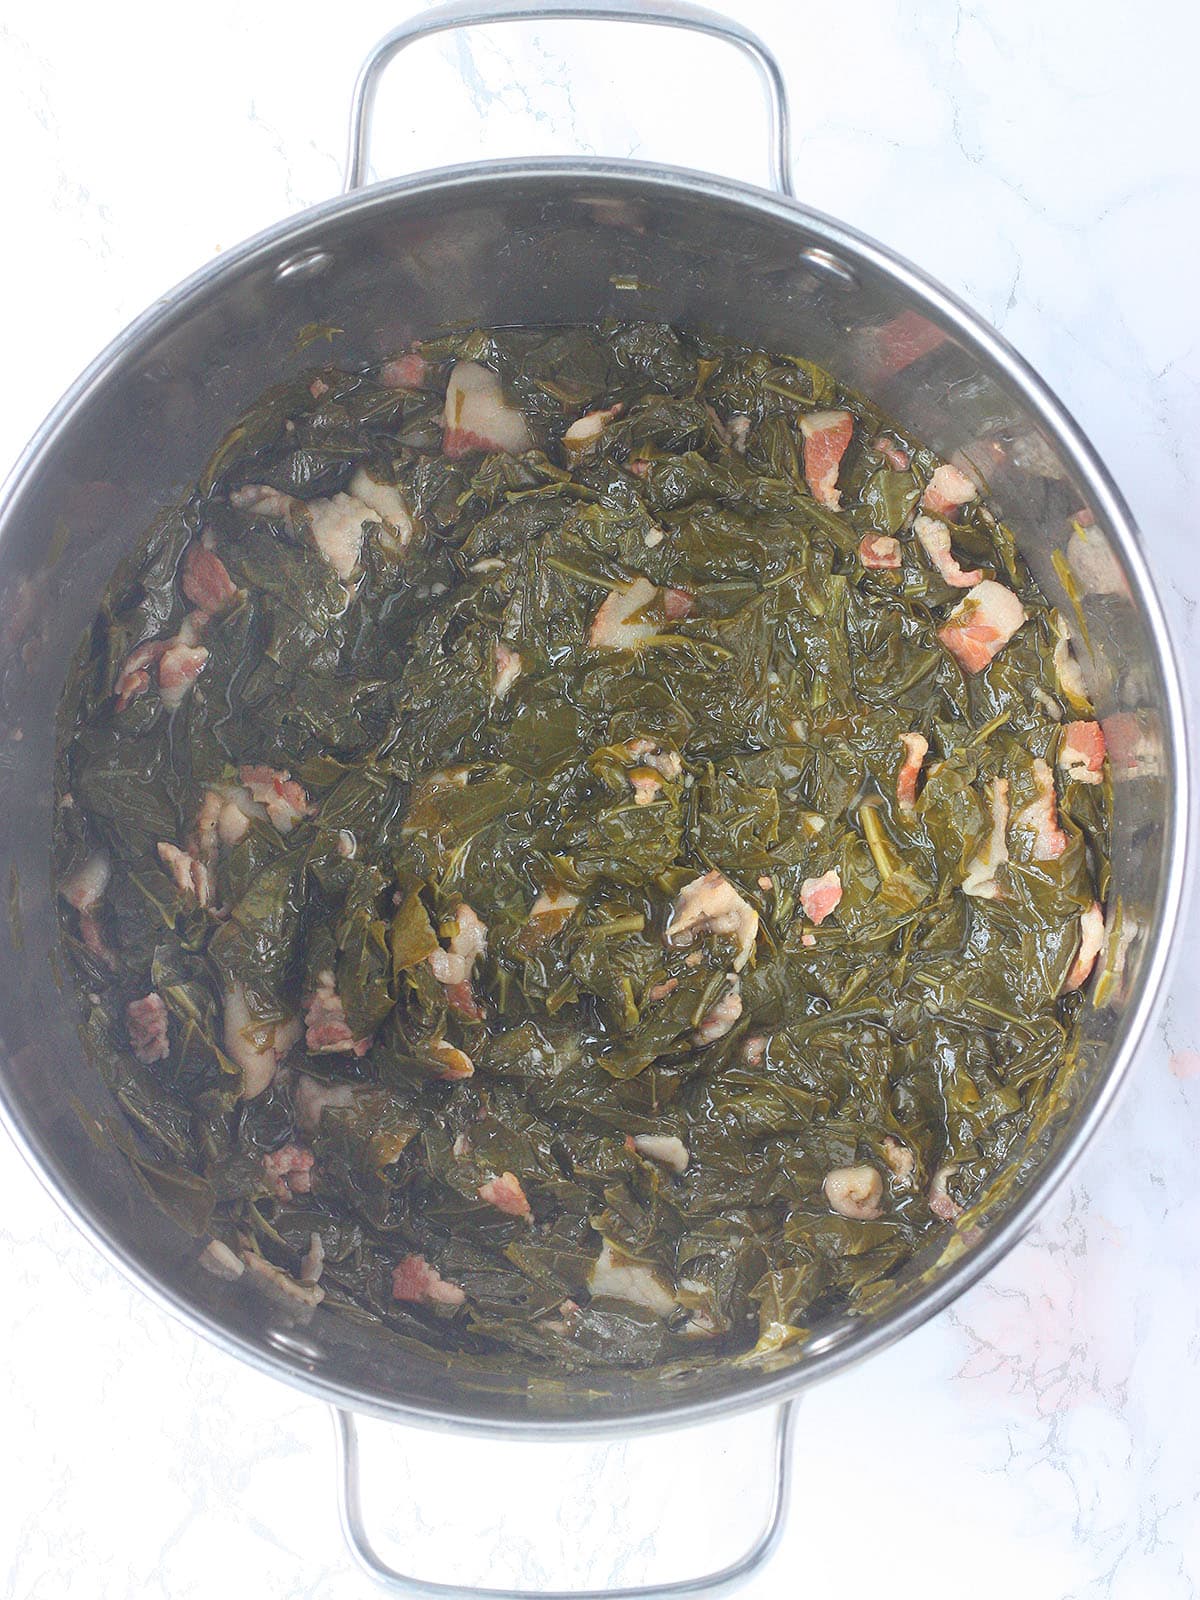 Cooked turnip greens in a stainless steel pot.